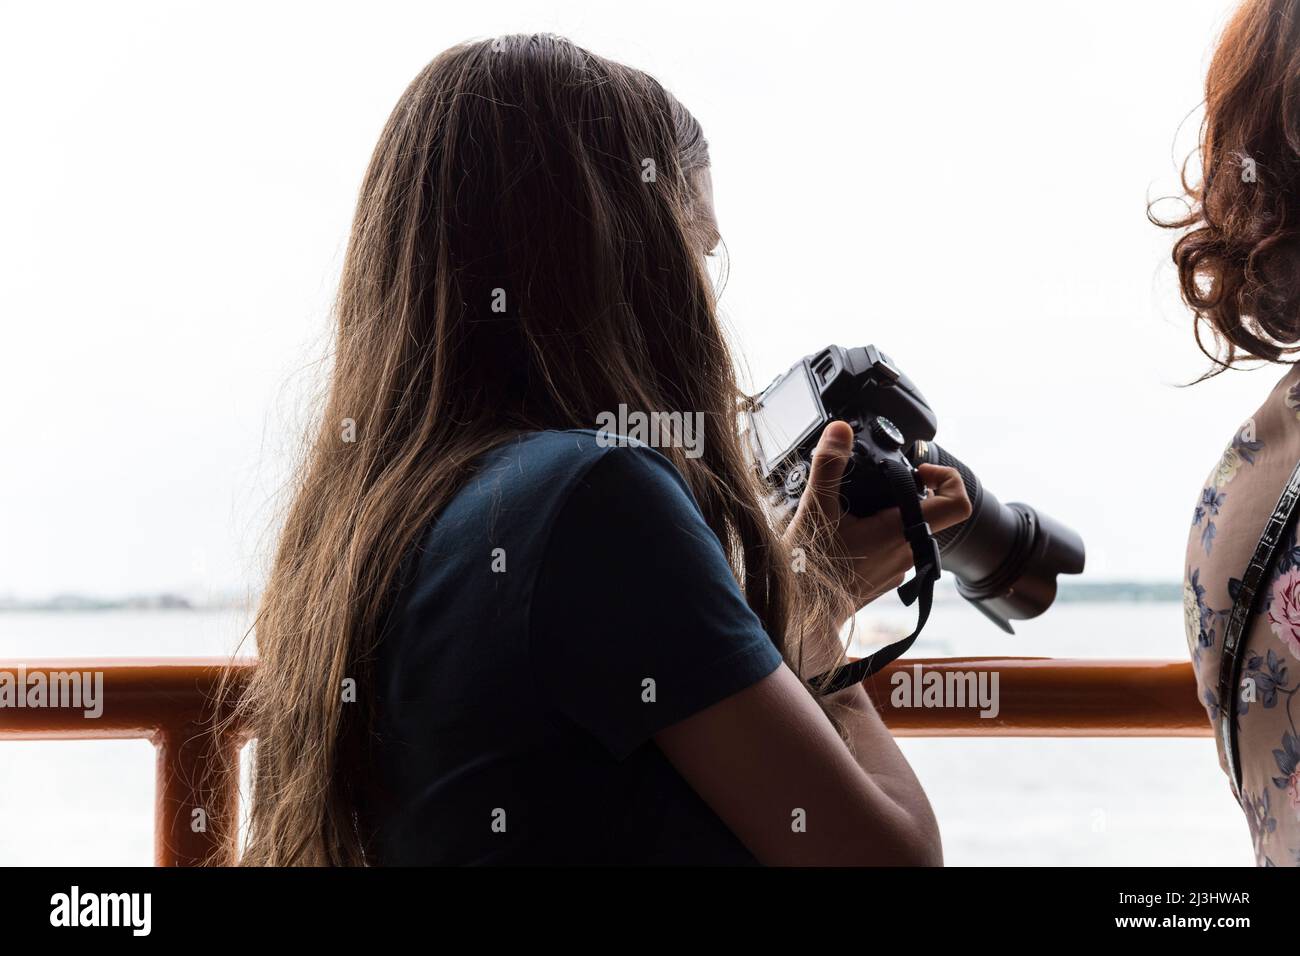 BROOKLYN, New York City, NY, USA, 14 years old, caucasian teenager girl with brown hair preparing the next Shot on the ferry Stock Photo